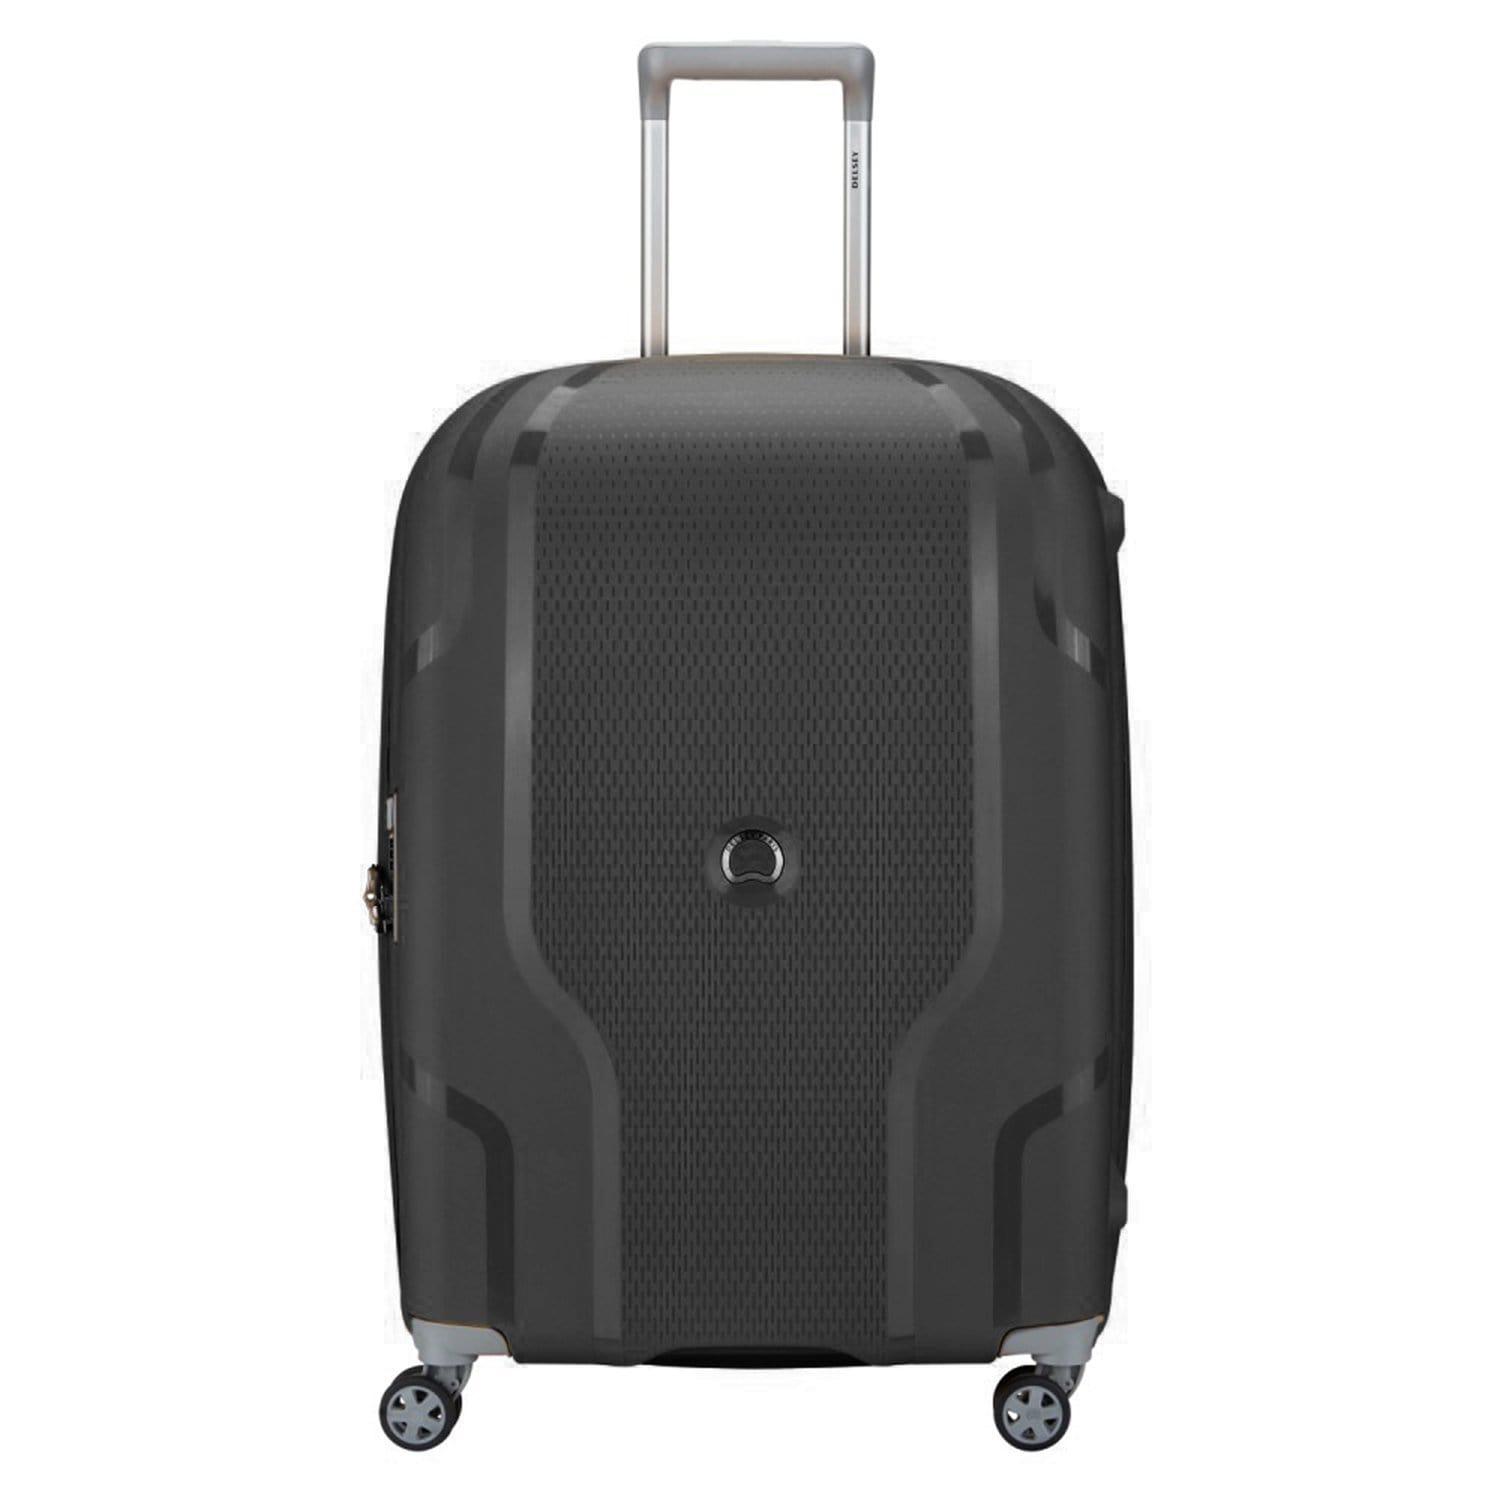 Delsey Clavel 83cm Hardcase 4 Double Wheel Expandable Check-In Luggage Trolley Black - 00384583000